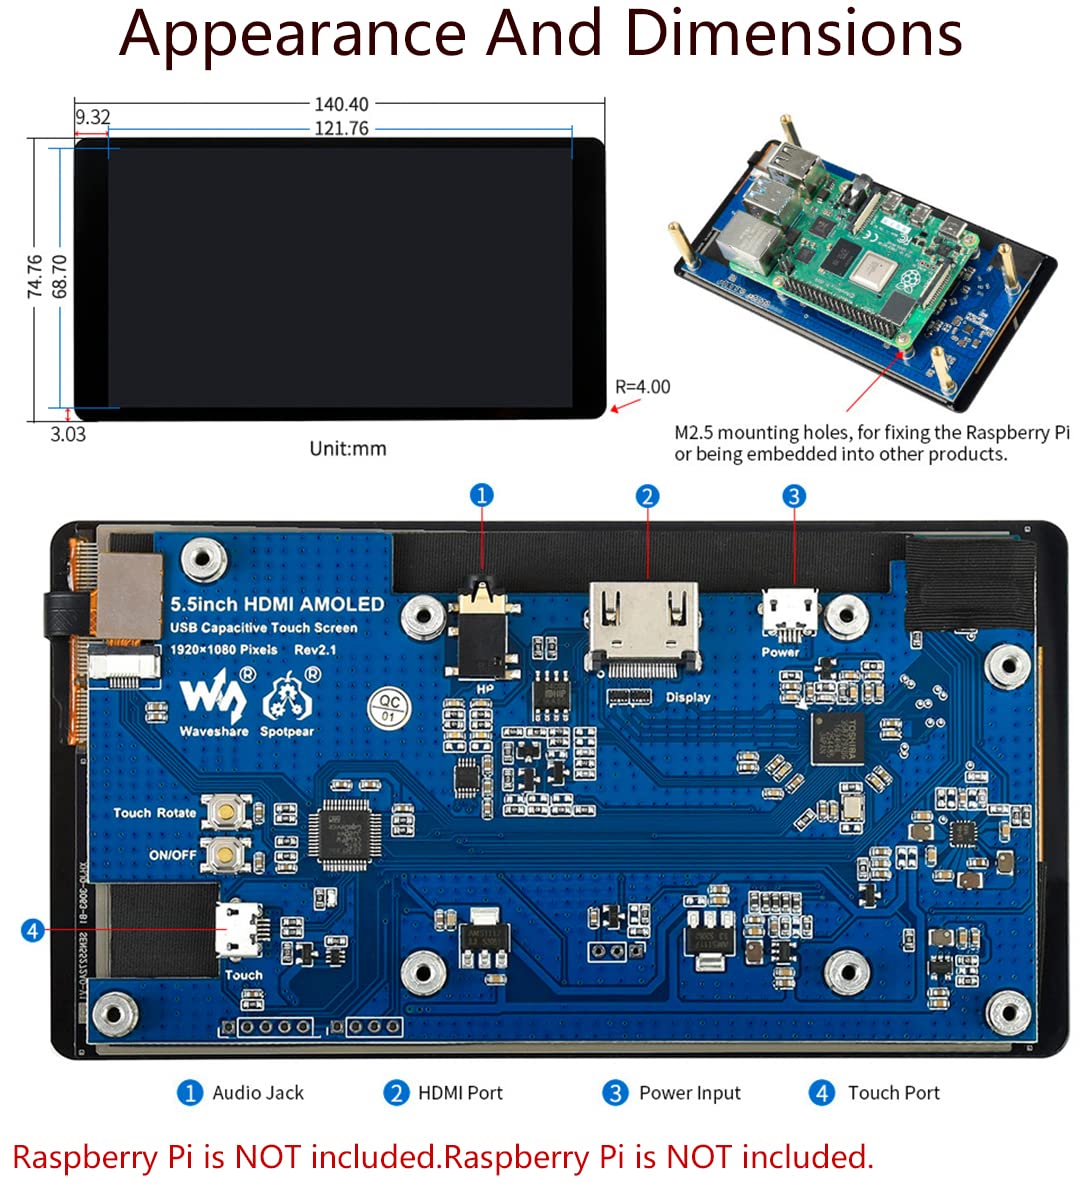 waveshare 5.5inch HDMI AMOLED Display 1080x1920 Resolution Capacitive Touch Screen with Toughened Glass Cover 6H Hardness for Raspberry Pi 4B/3B+/3B/2B/Zero/Zero W and Jetson Nano,PC,Multi Systems